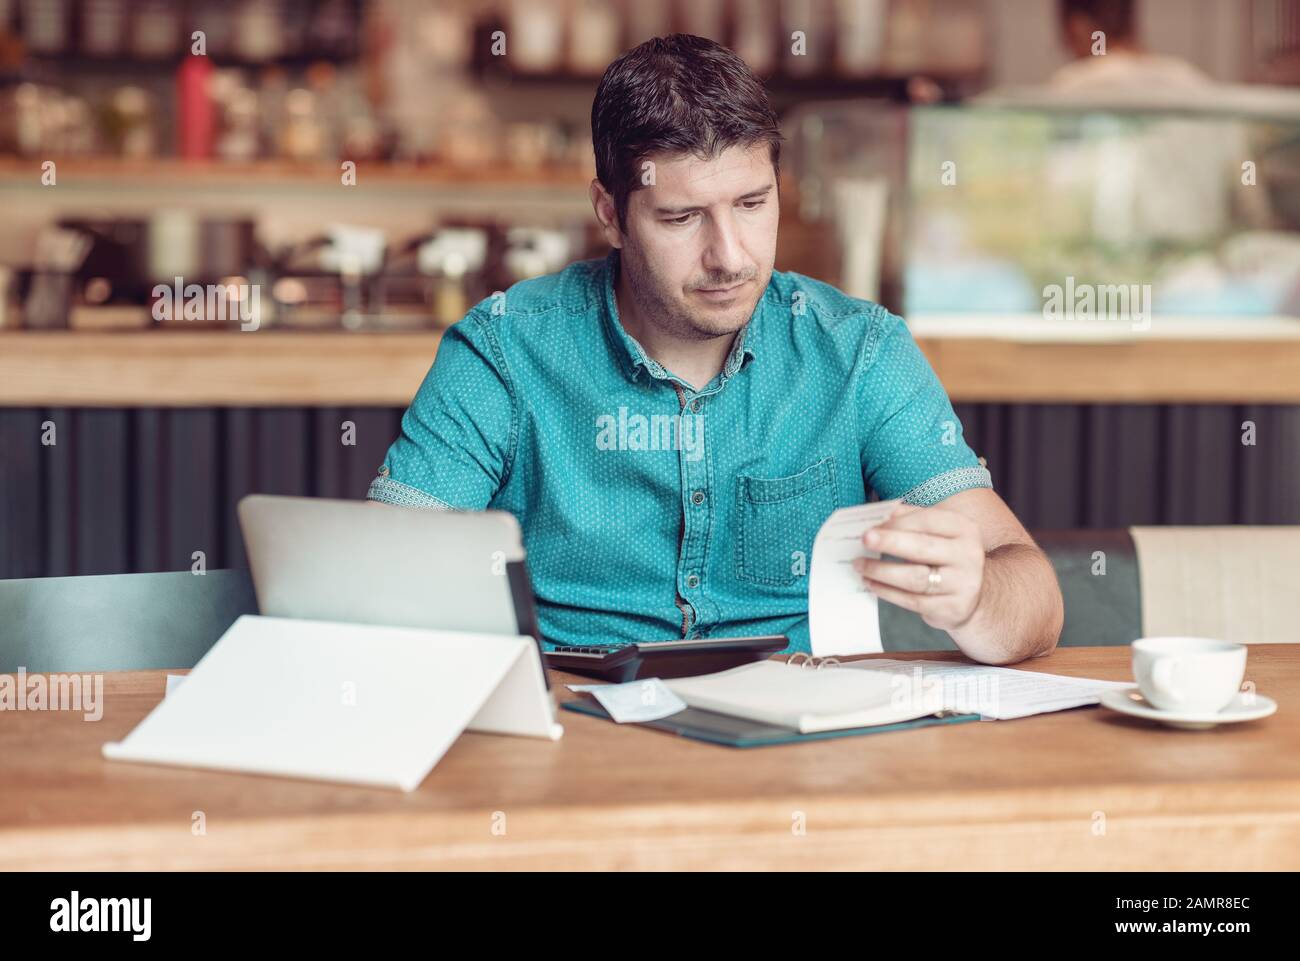 Entrepreneur managing his small business - Businessman looking overwhelmed - Young coffee shop owner going through paperwork Stock Photo